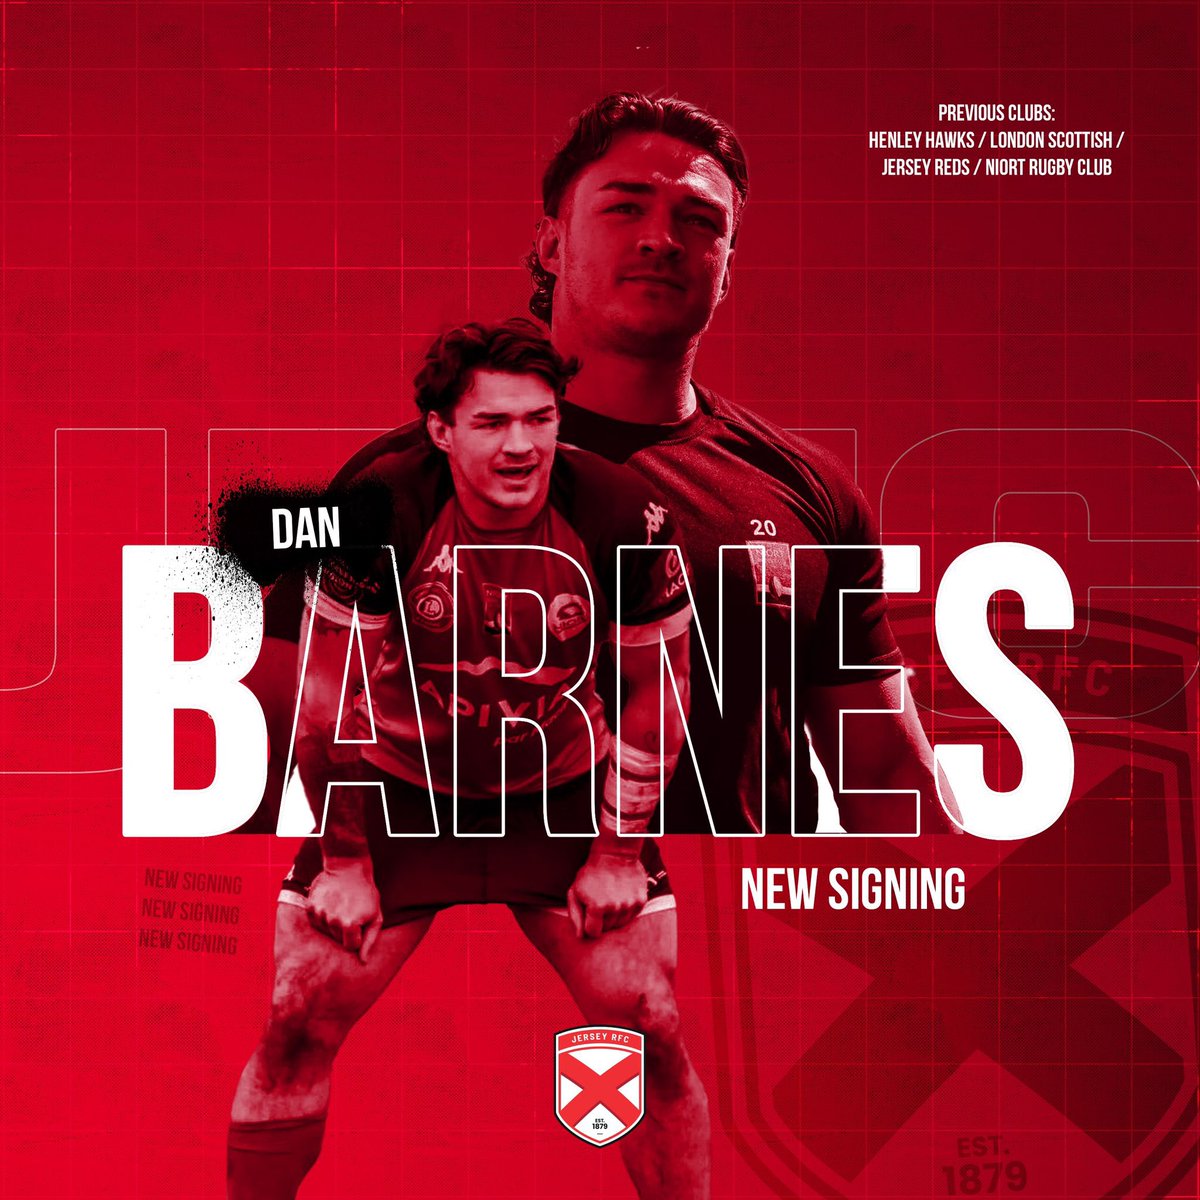 🔴 WELCOME DAN BARNES 🔴

Jersey RFC would like to welcome Dan Barnes back to familiar surroundings as the former Red returns to the Island after finishing with French Club Noirt Rugby Club. 

Dan's considerable experience, quality, and leadership make him a valuable addition 🙌